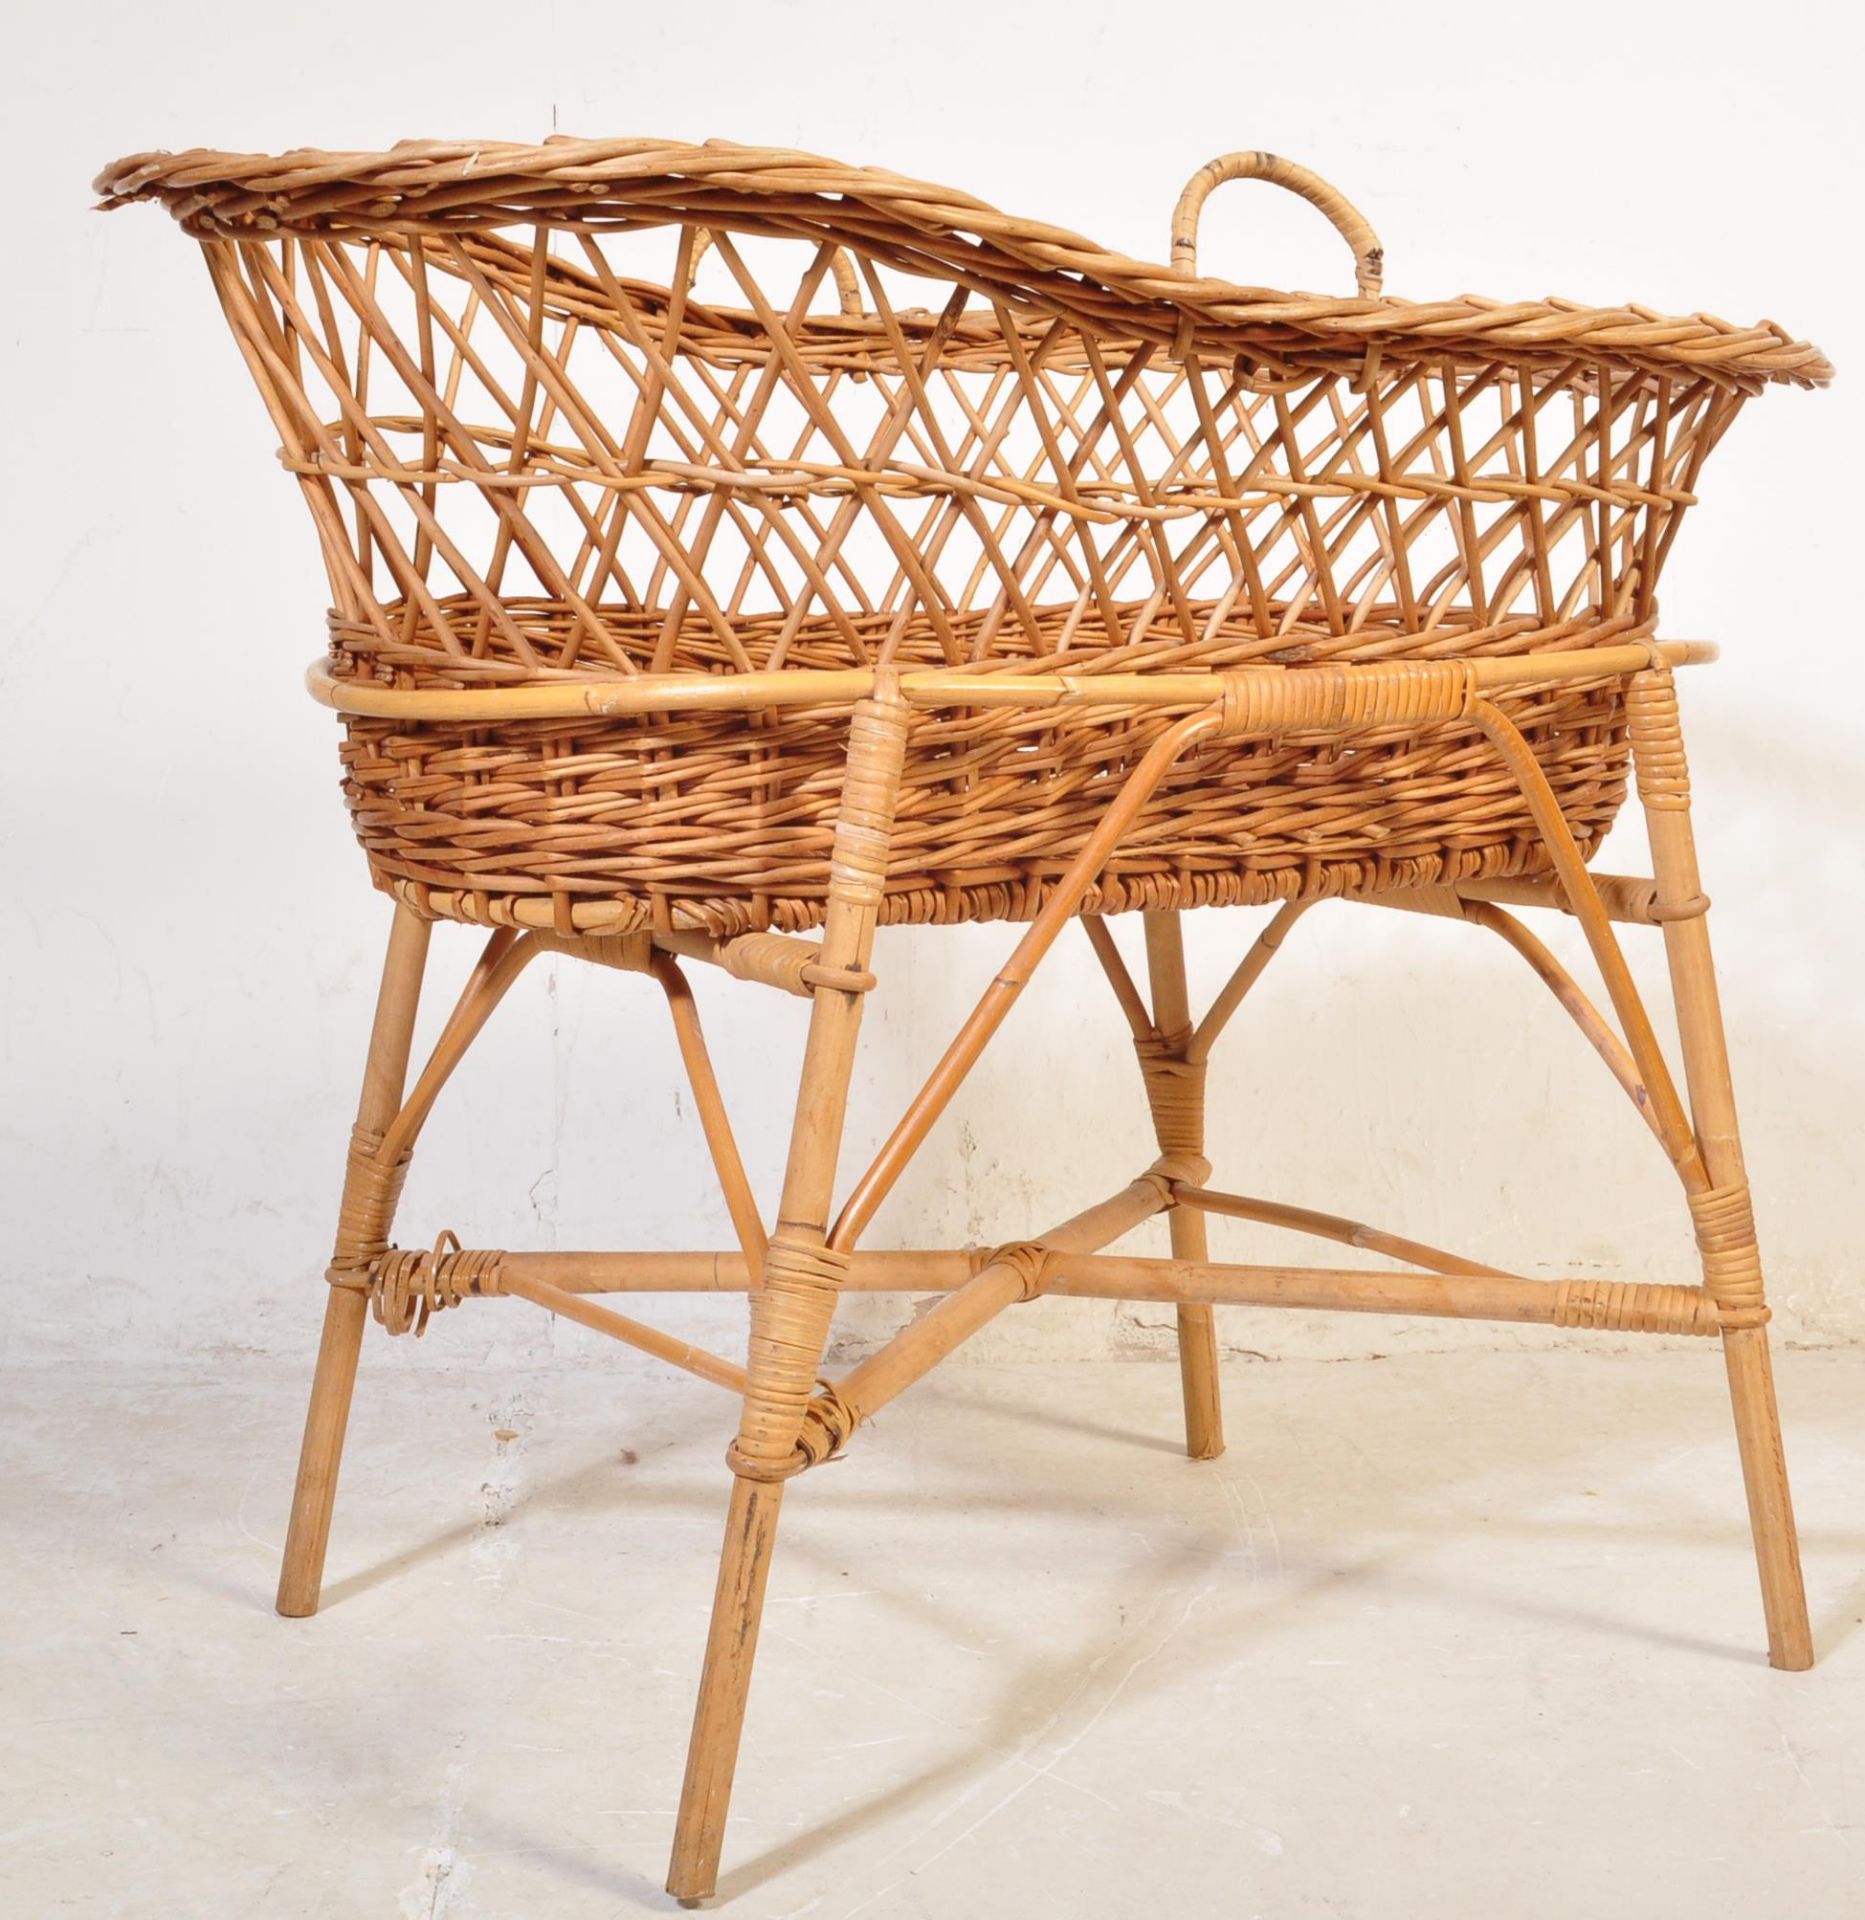 A RETRO VINTAGE CANED WICKER BAMBOO MOSES BASKET